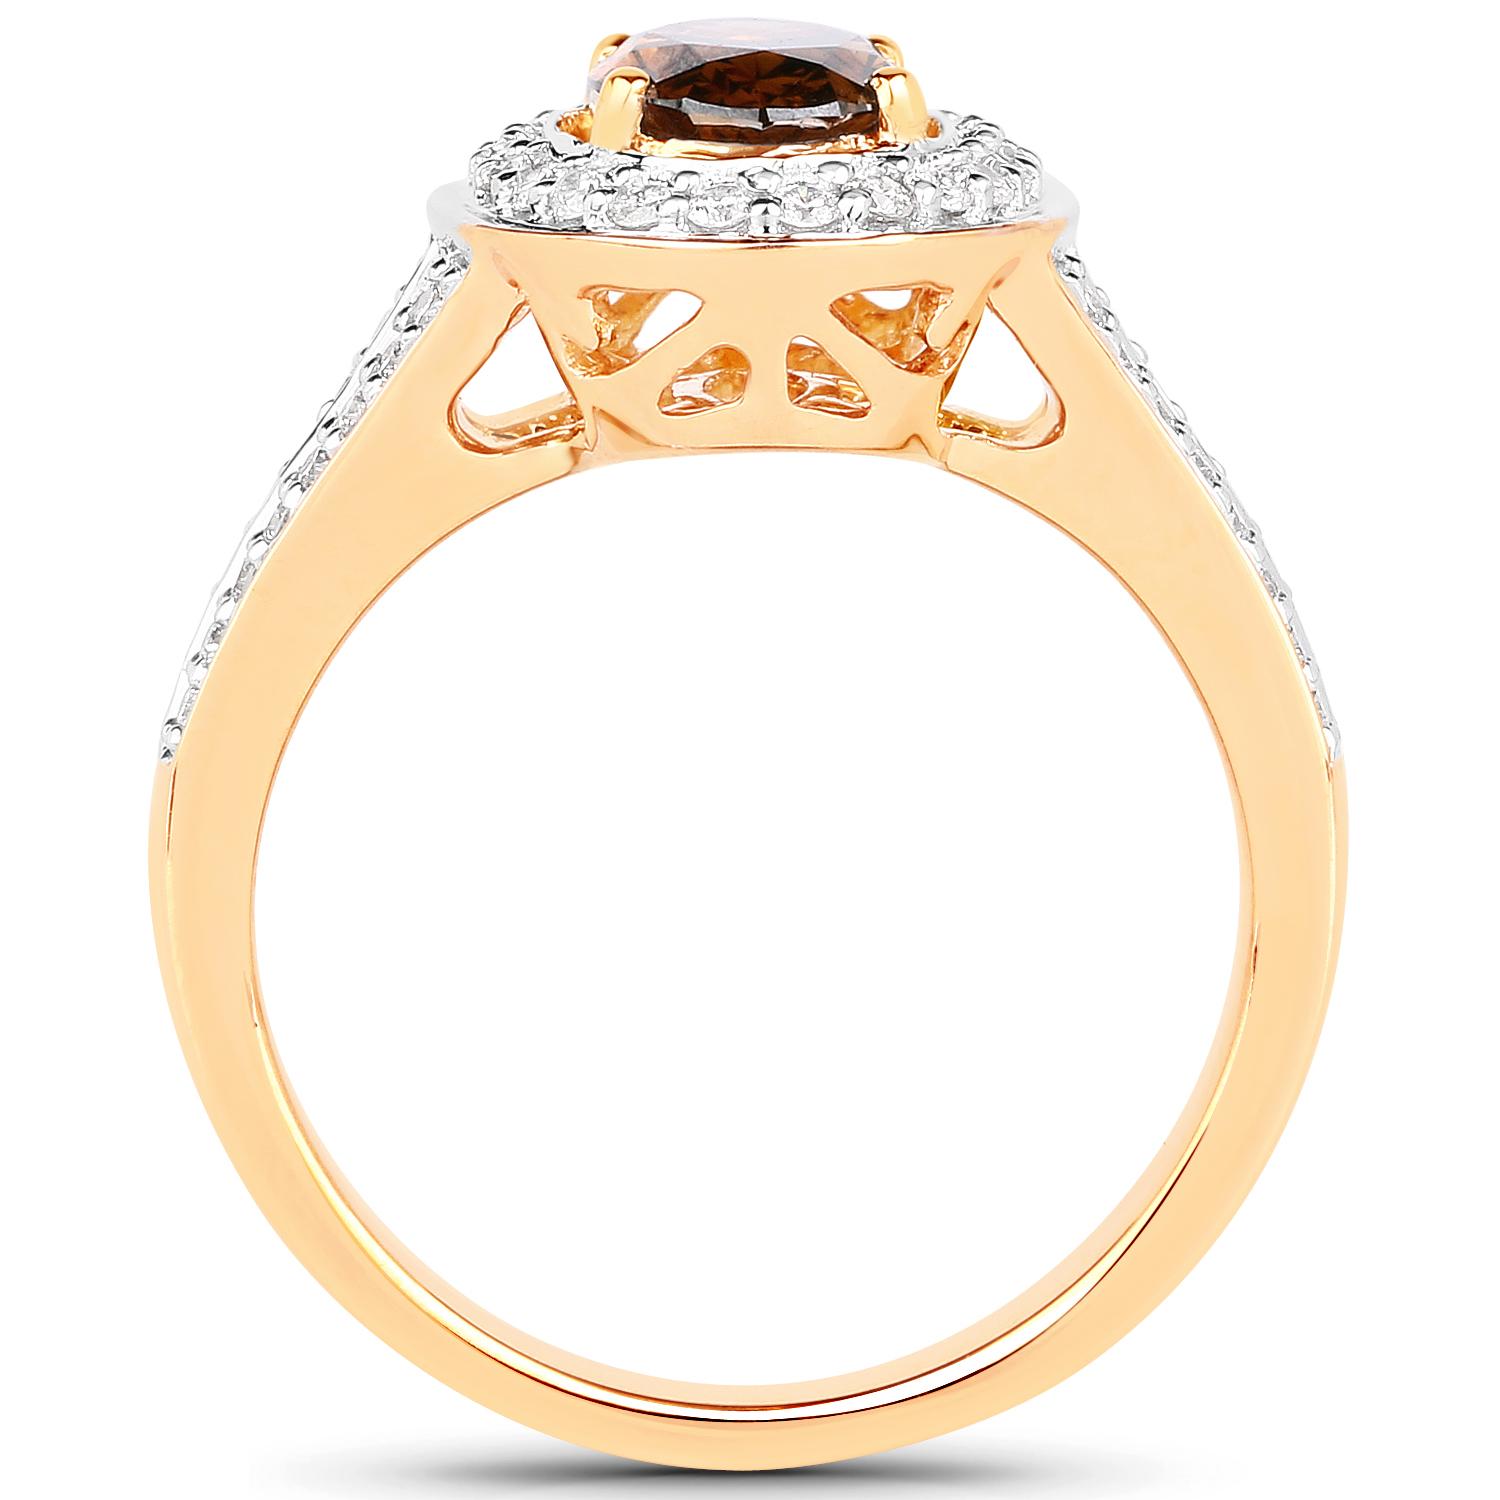 1.16 Carat Oval Shape Chocolate Diamond and 0.36 Carat White Diamond 18K Yellow Gold Bridal Ring

Center Stone Details: 
Stone: Chocolate Brown Diamond (untreated)
Shape: Oval cut 
Size: 8.70mm x 5.80mm
Weight: 1.16 carat
Quality: SI1-SI2, Natural